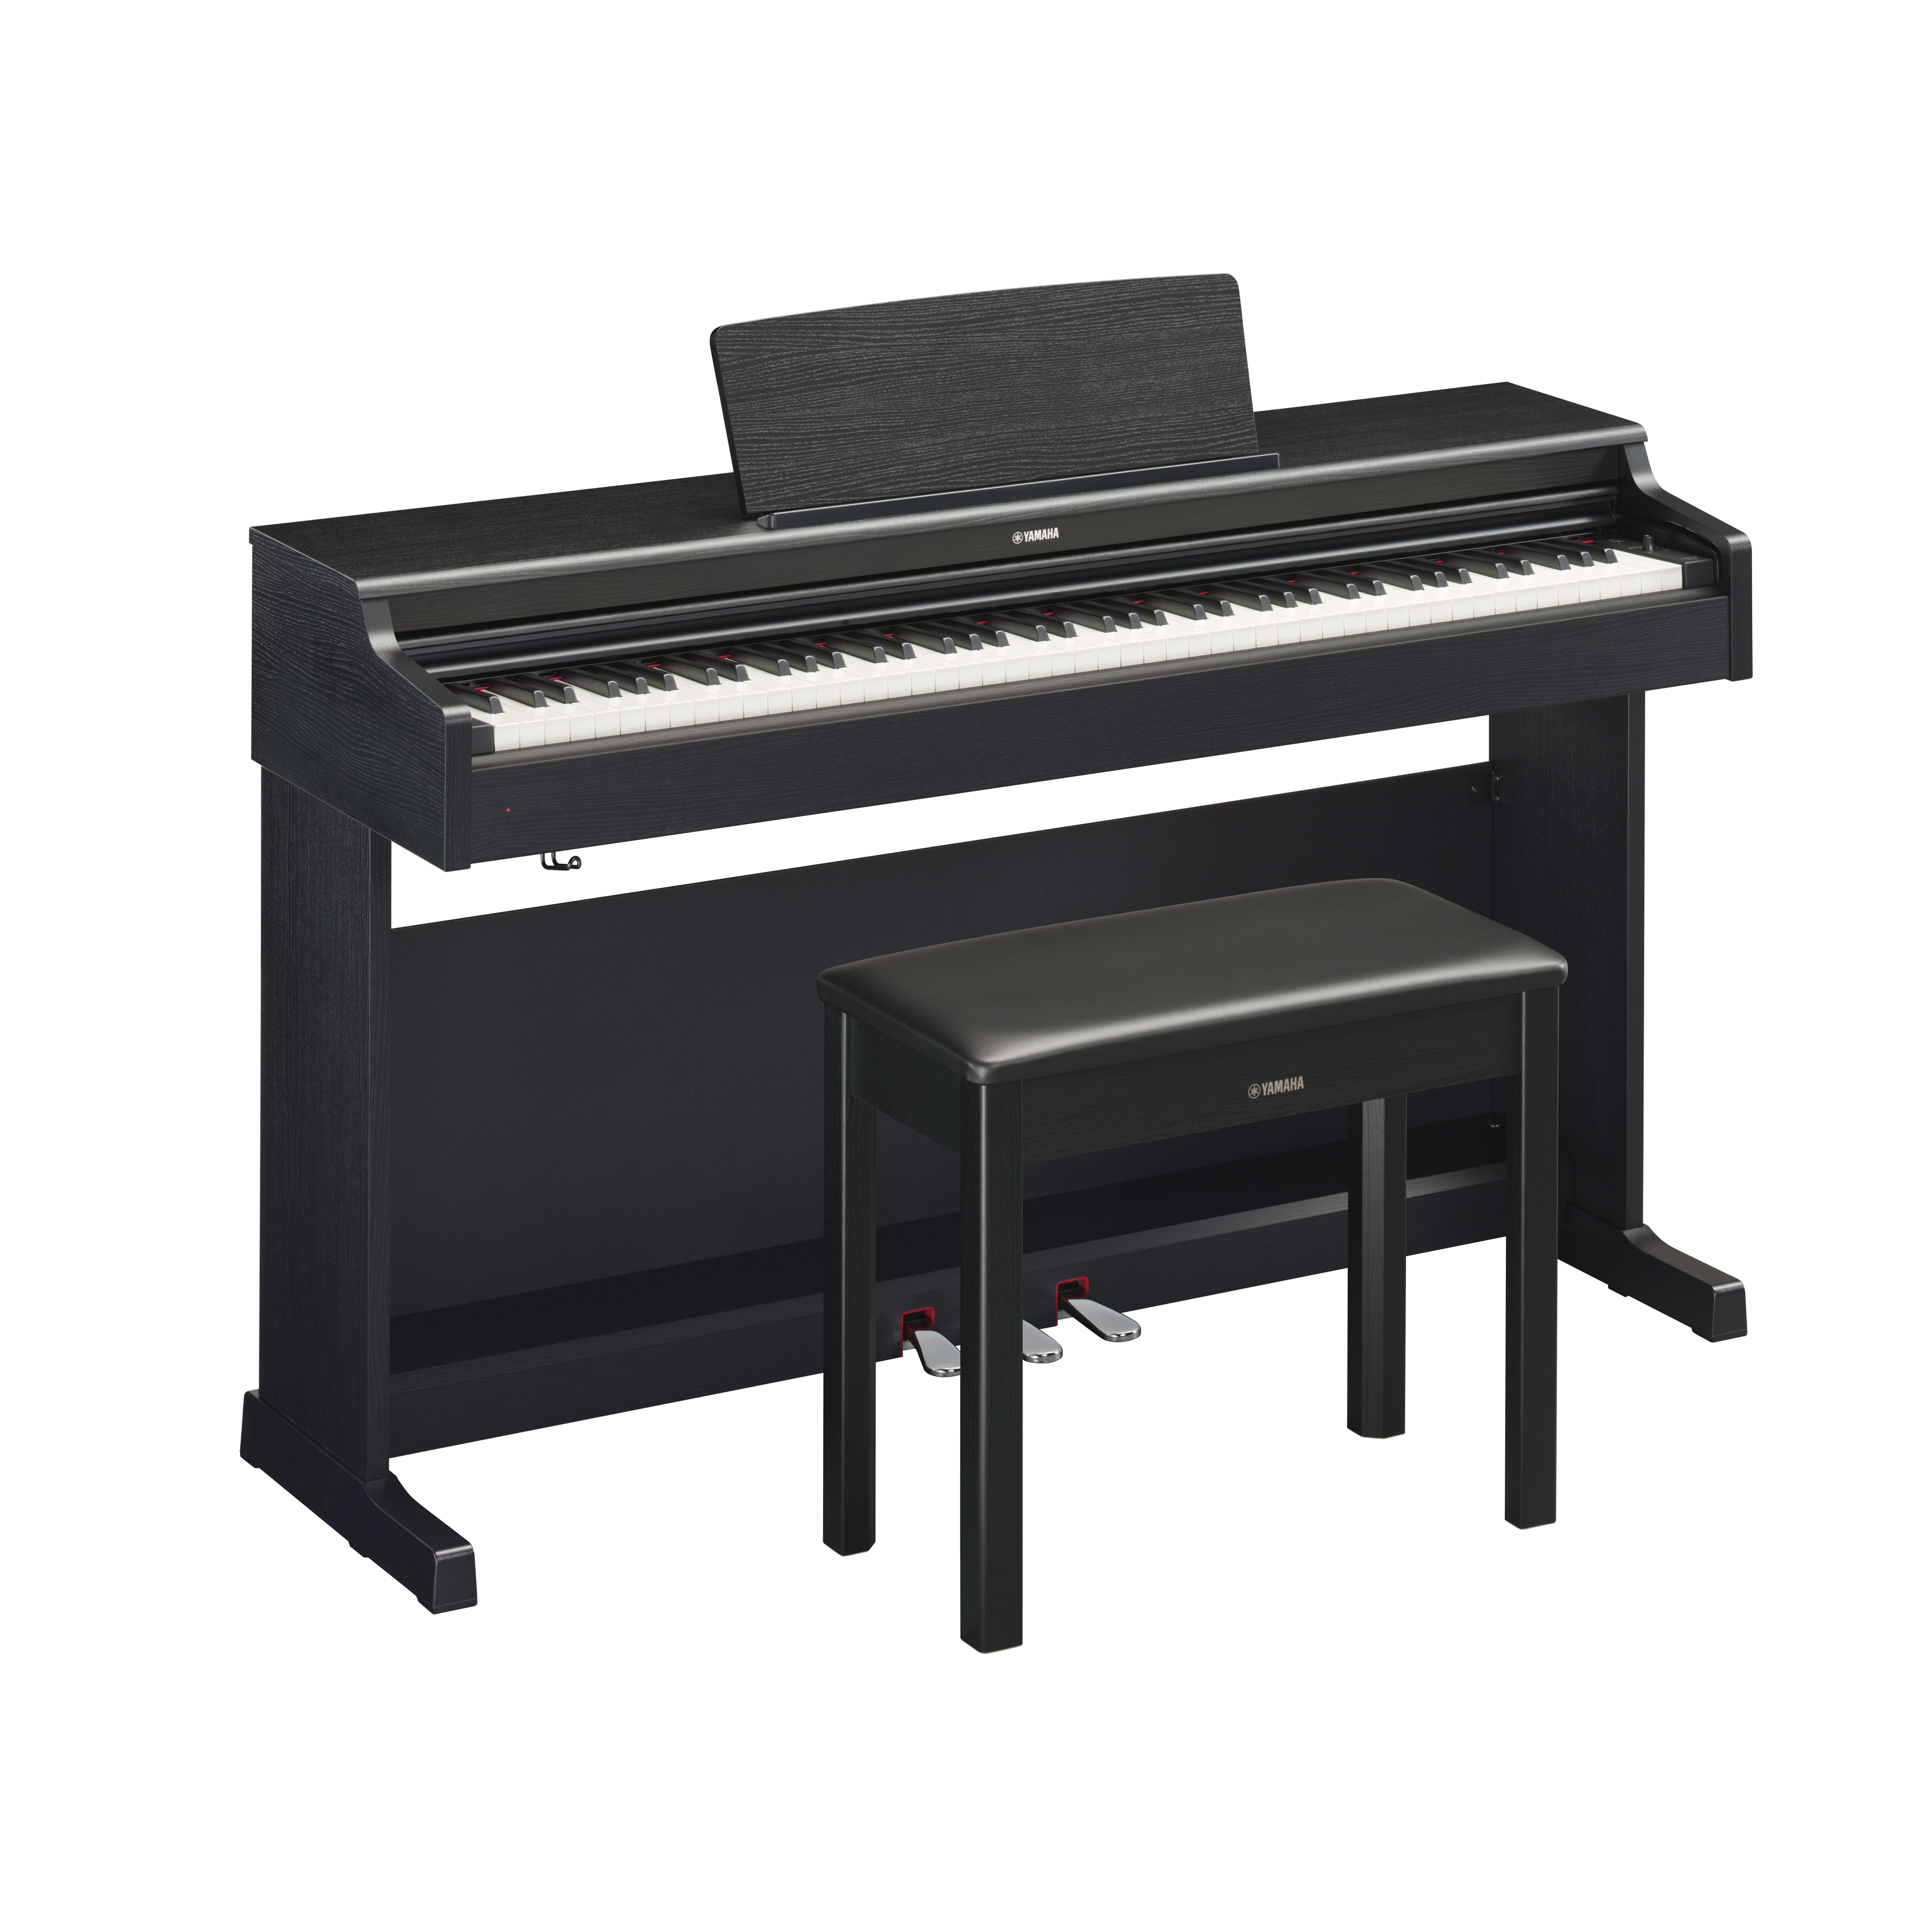 YDP-164 - Specs - ARIUS - Pianos - Musical Instruments - Products 